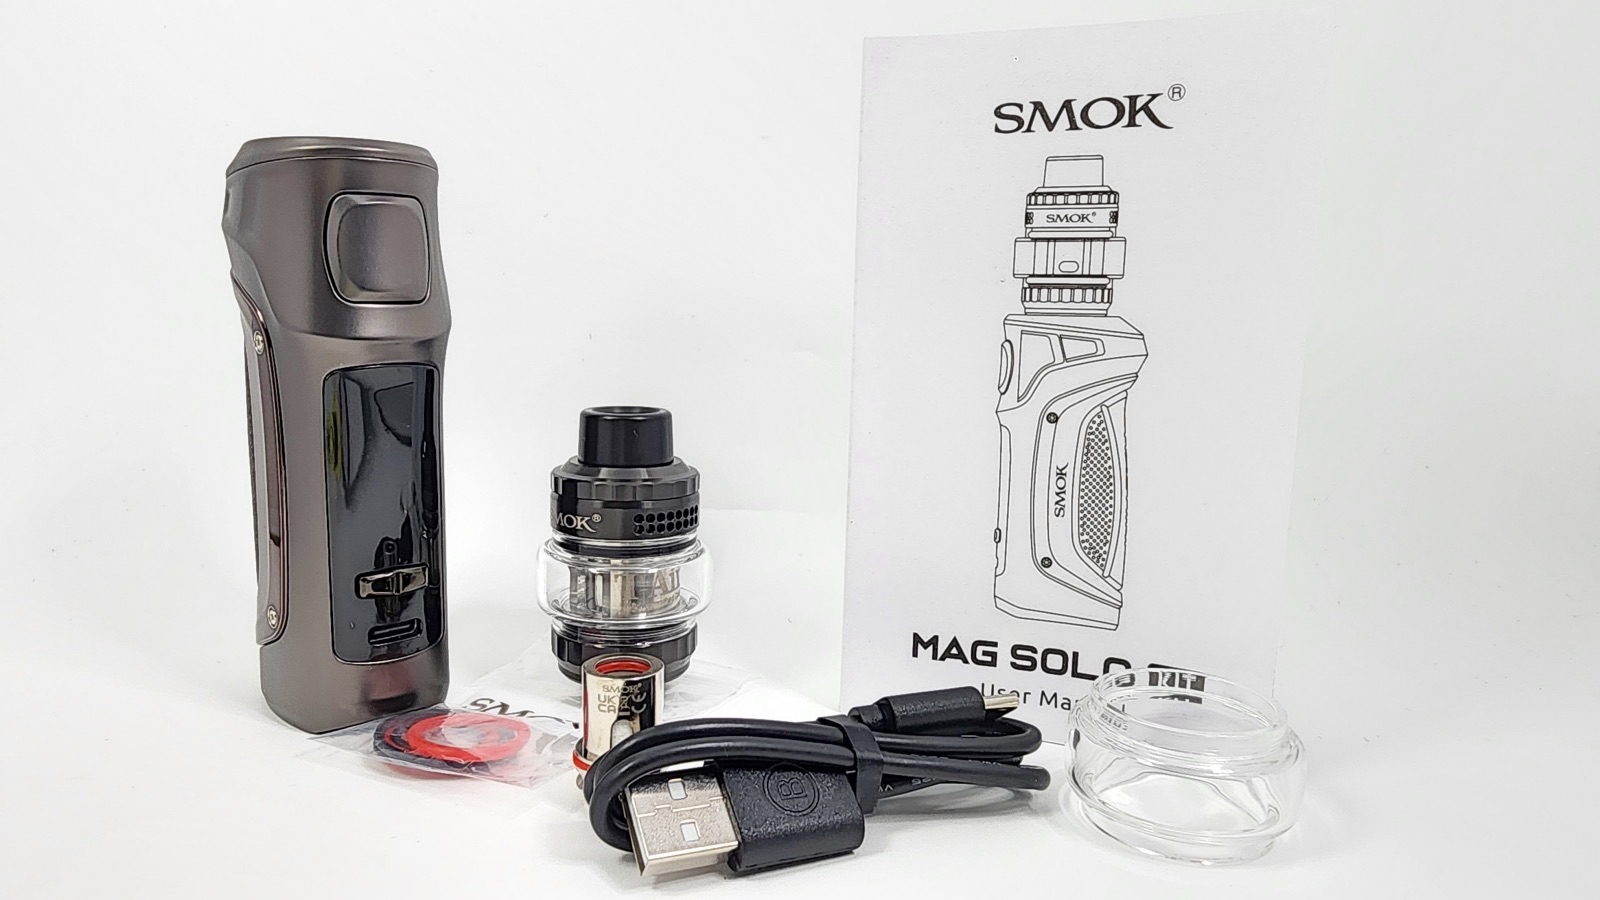 All parts of Smok Mag Solo Kit